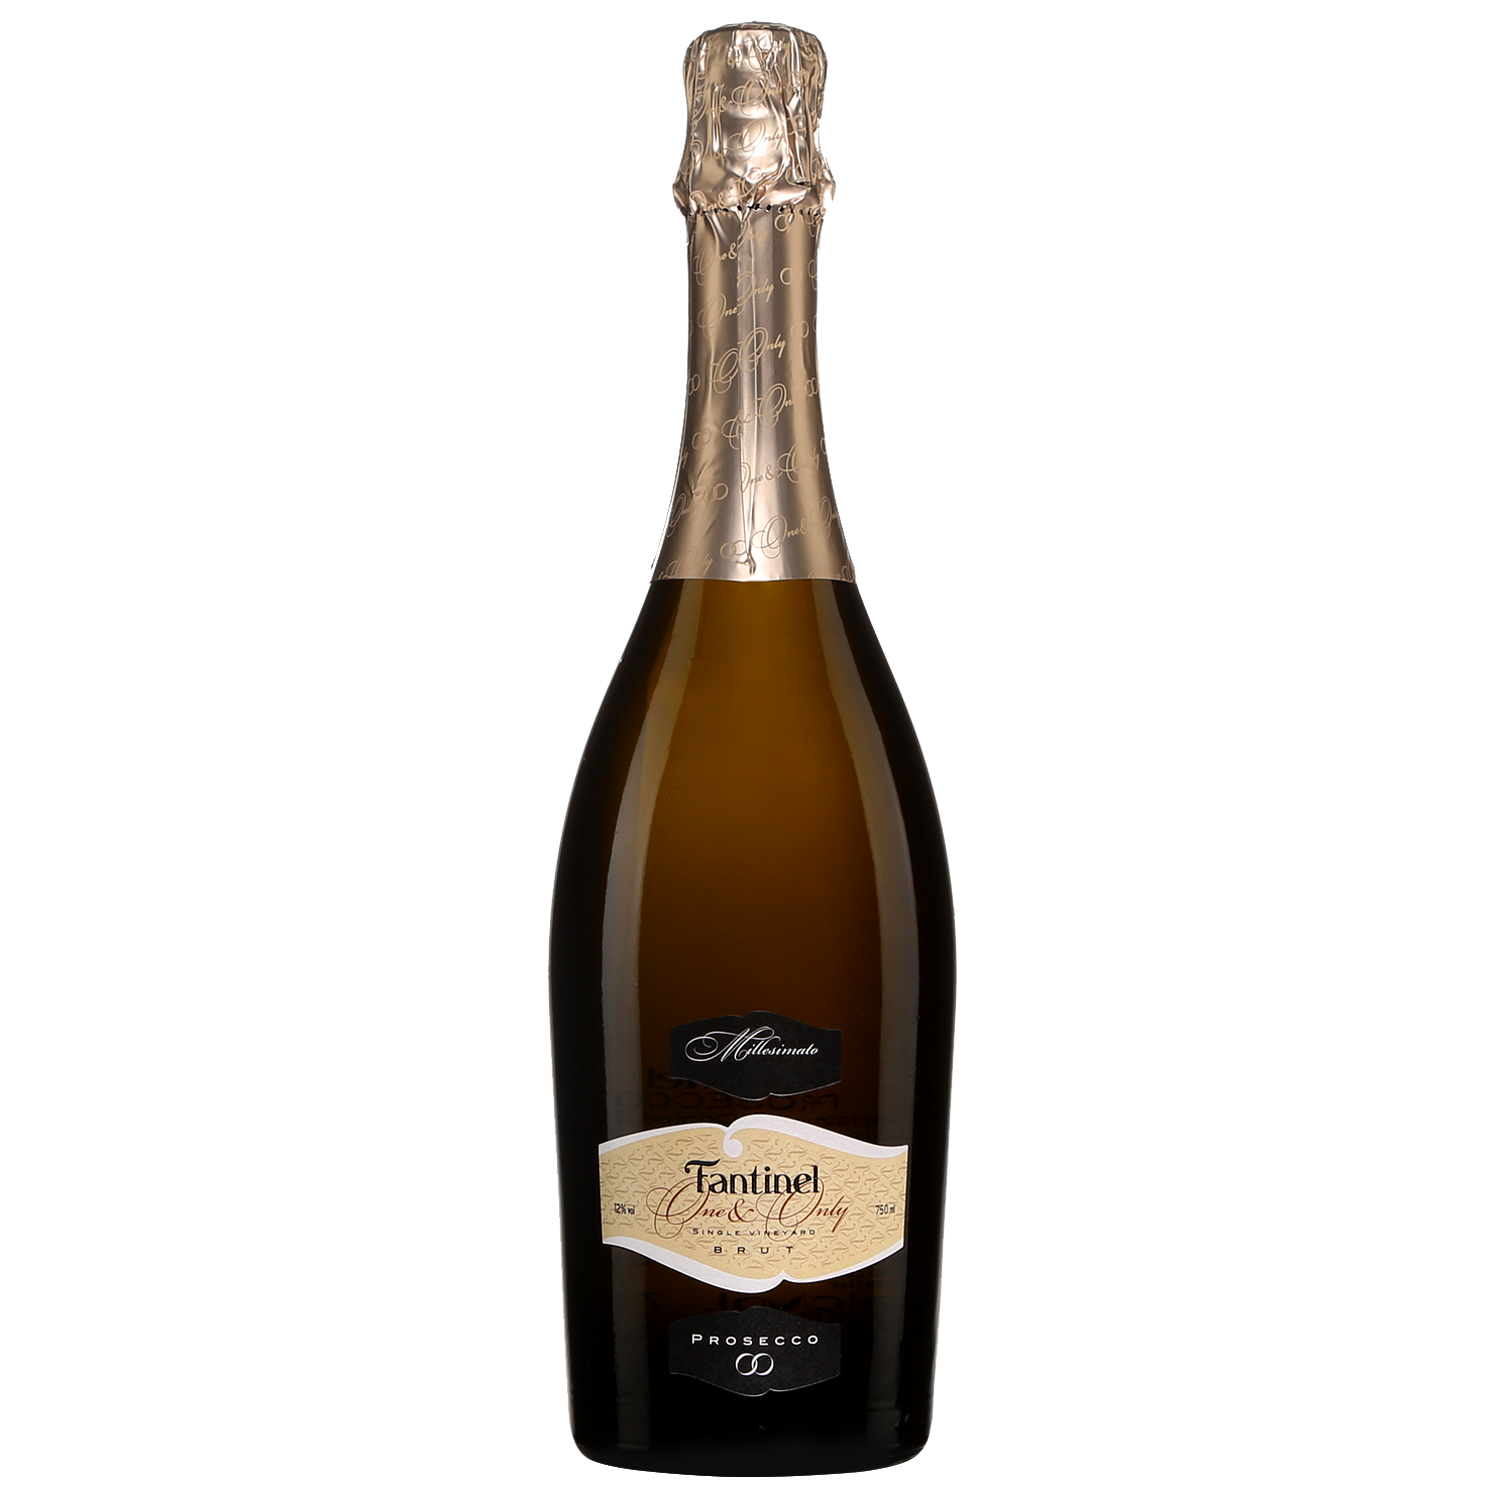 2018 Fantinel 'One and Only' Prosecco Brut Millesimato